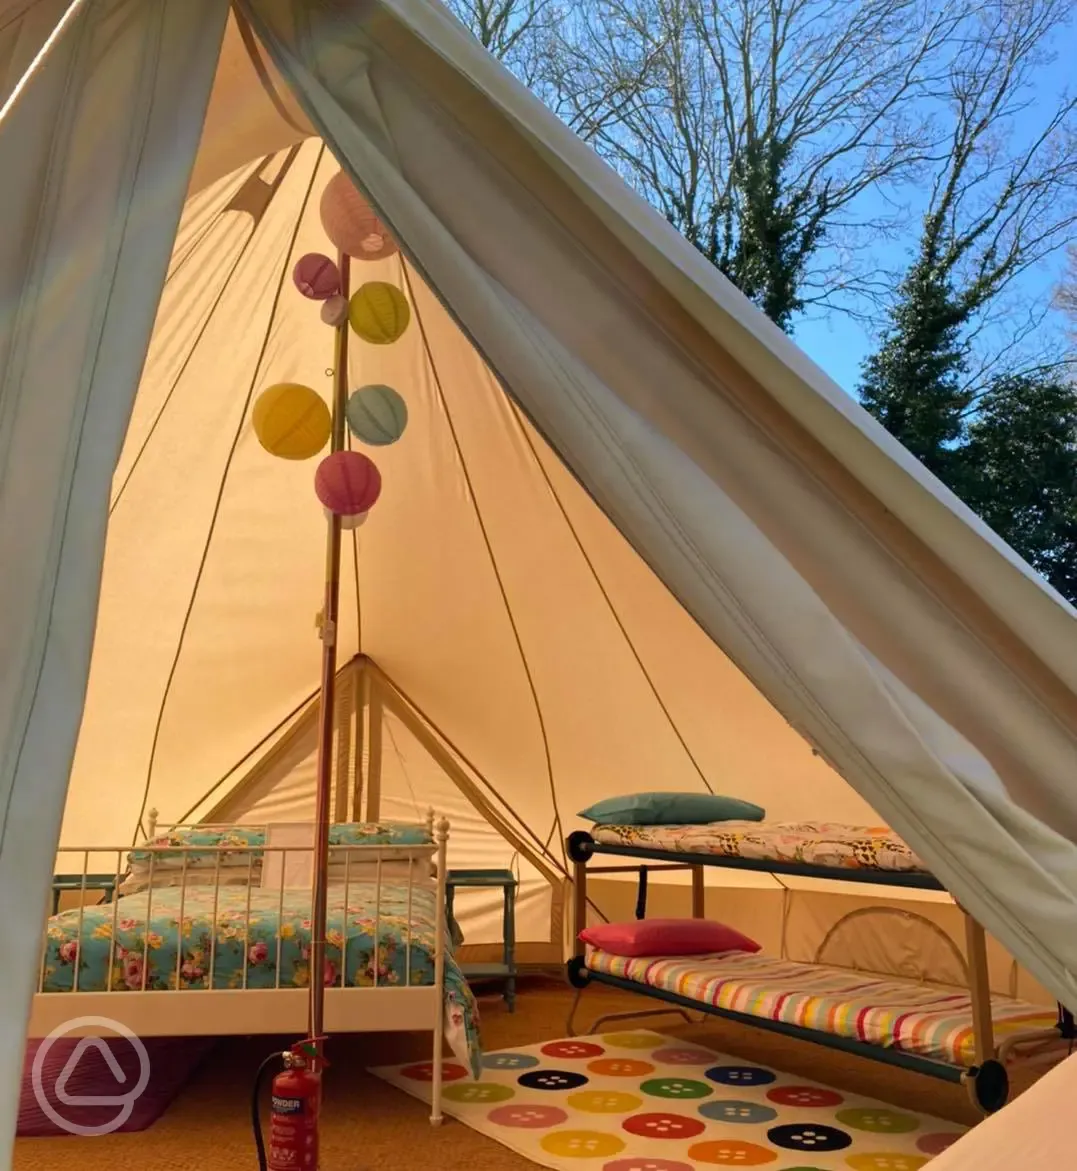 Bunk bed in bell tents